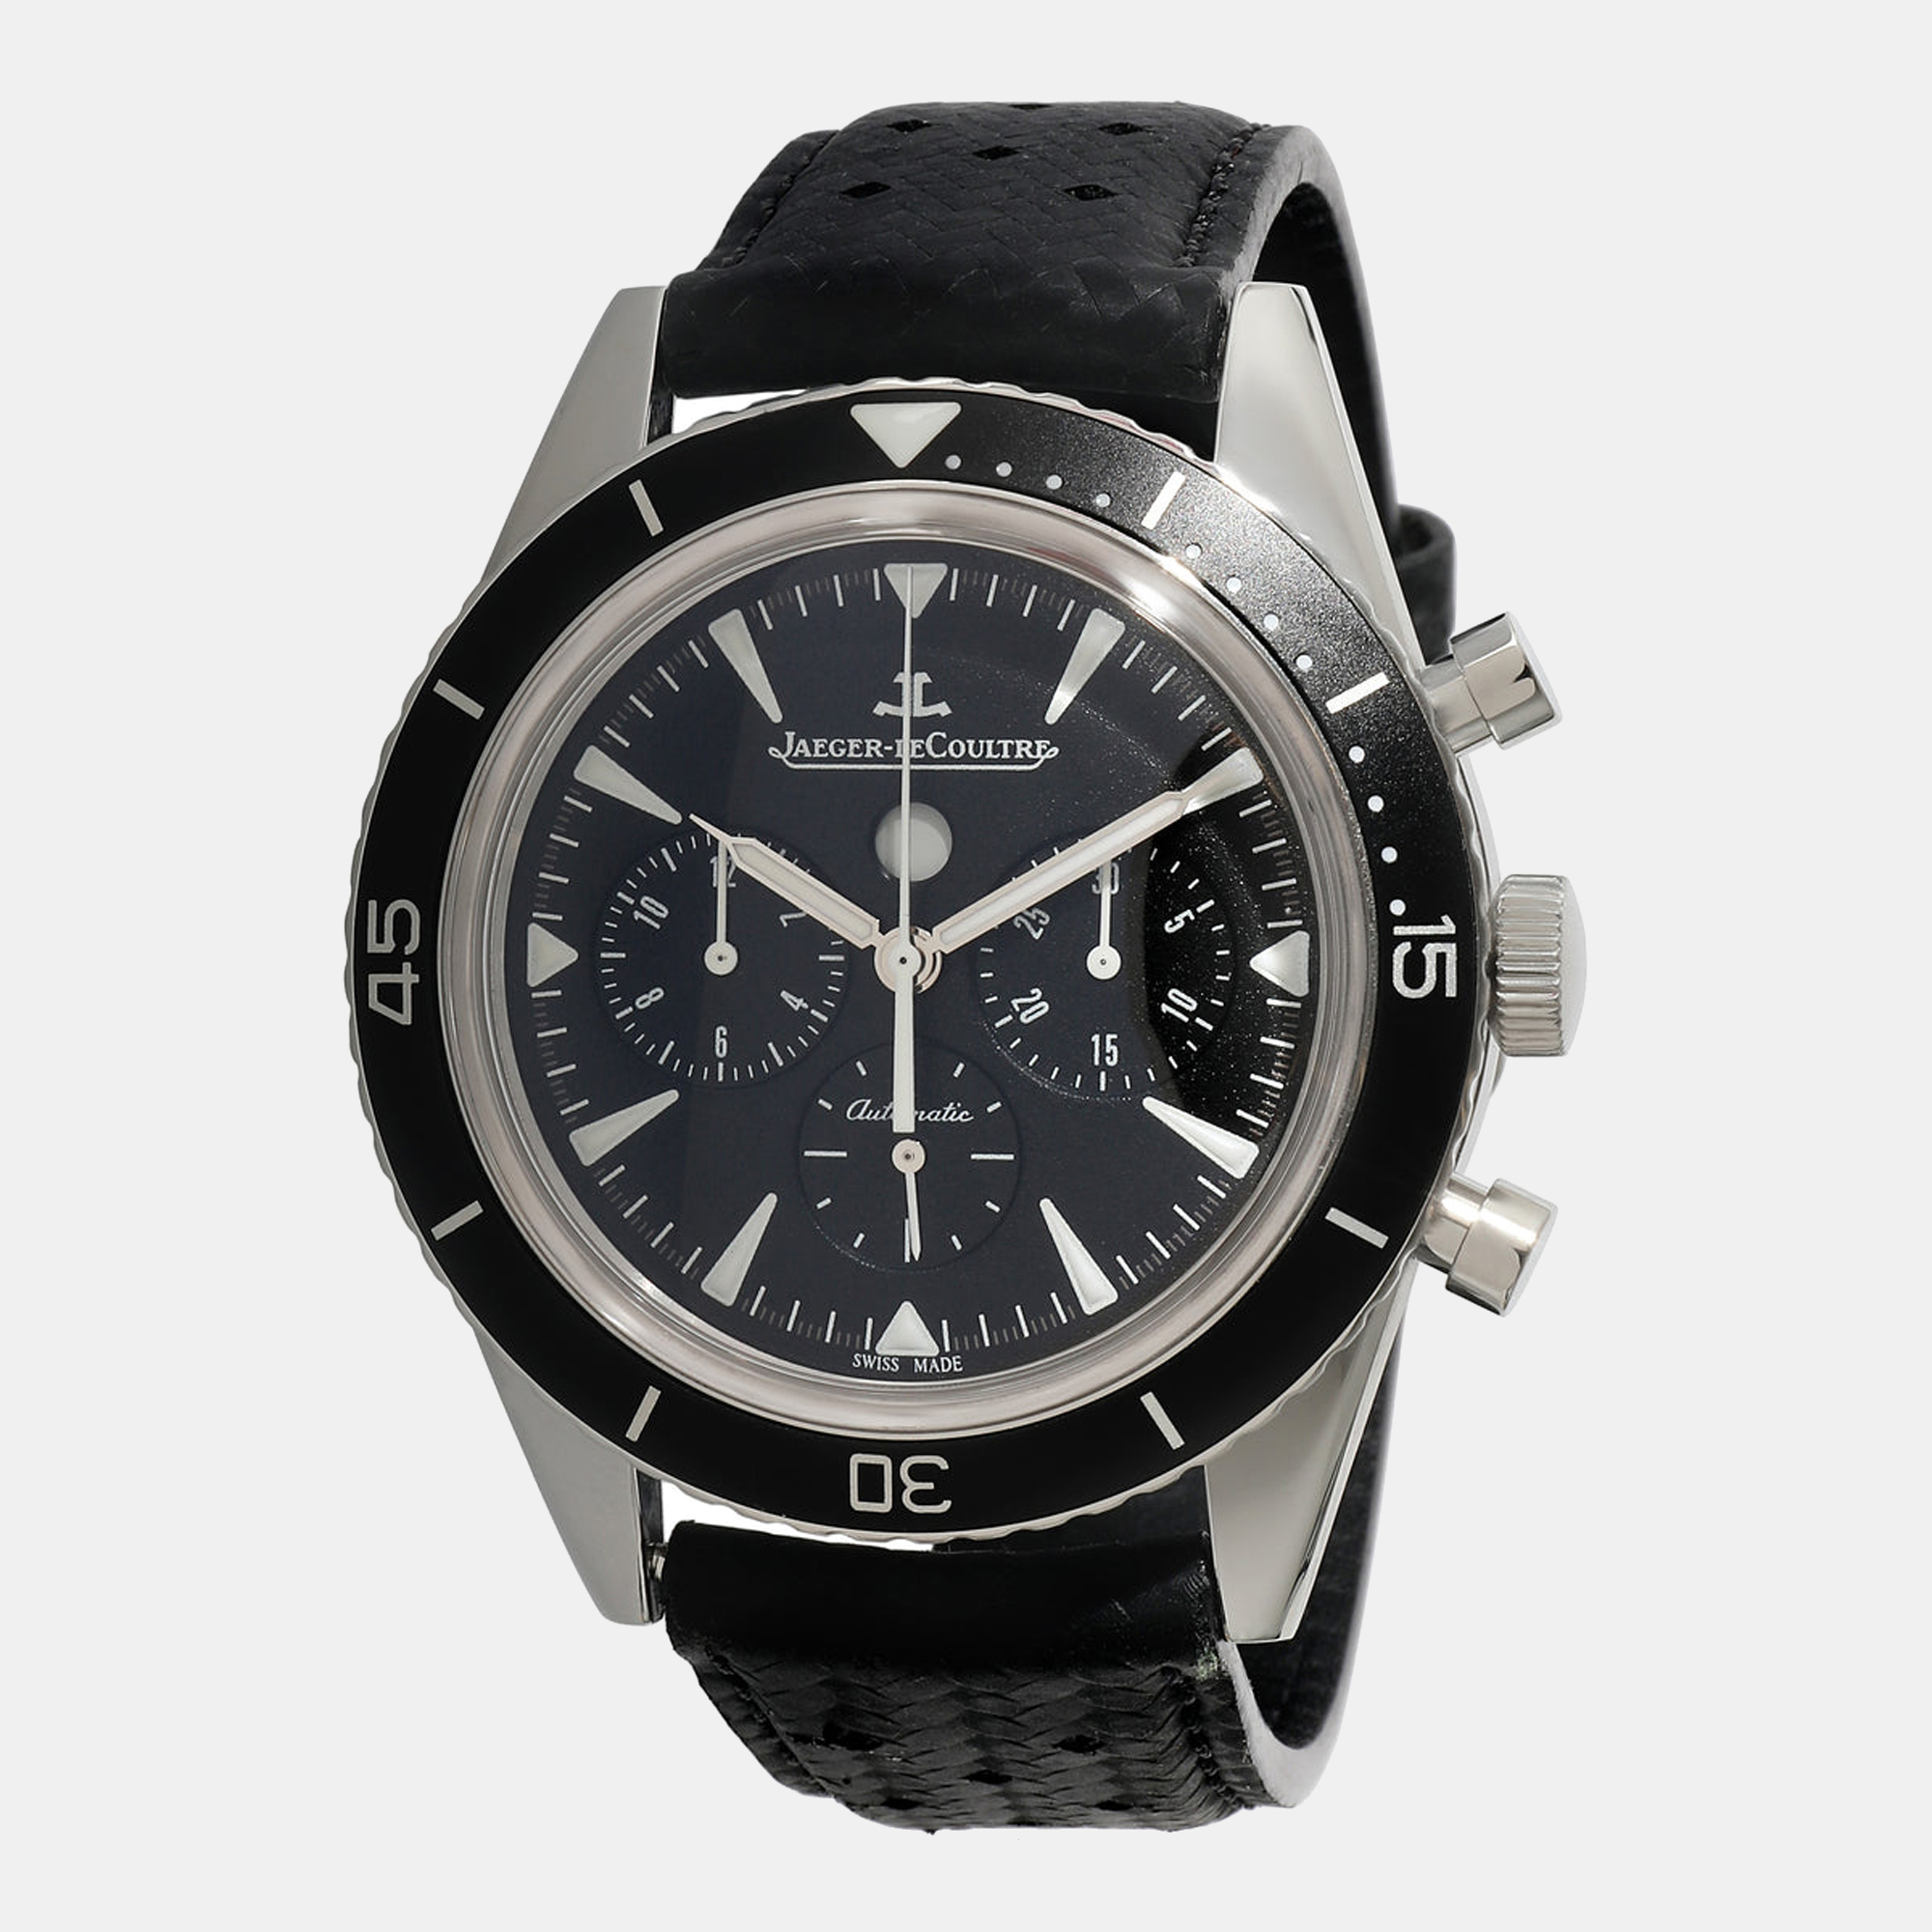 Jaeger LeCoultre Black Stainless Steel Master Control Chronograph Q2068570 Automatic Men's Wristwatch 42mm